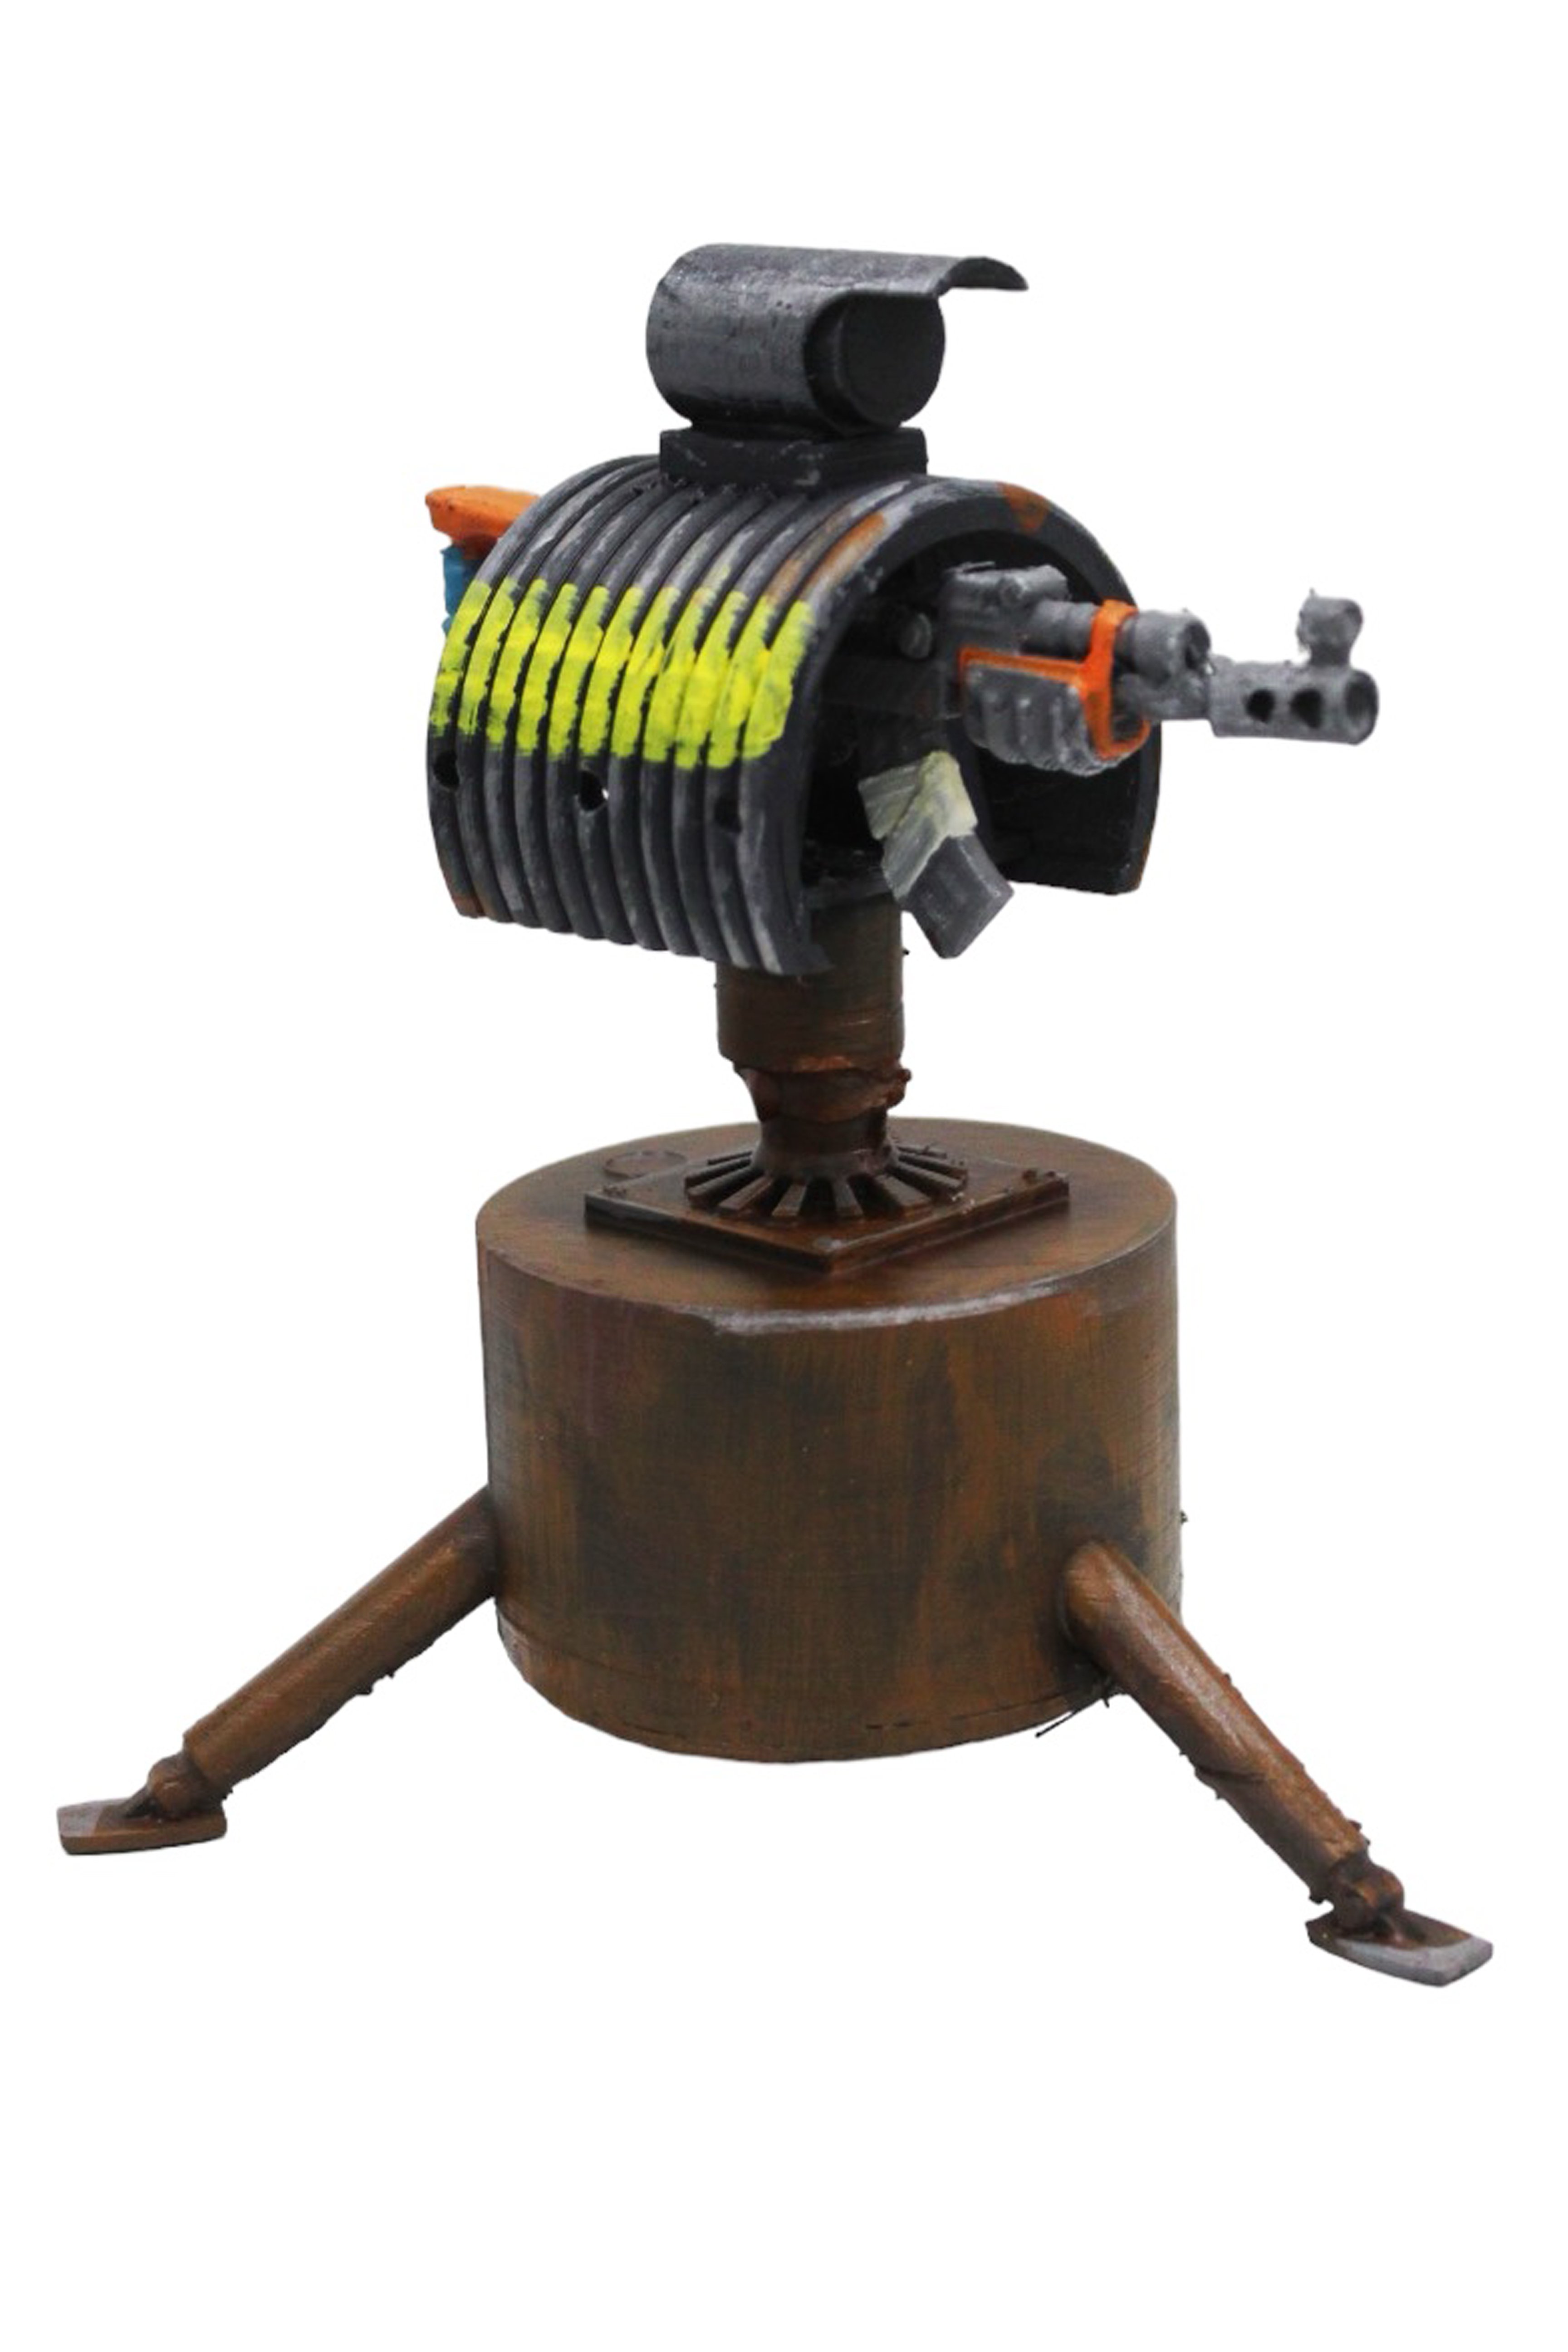 Rust Game Auto Turret Gift for Rust Player Special product